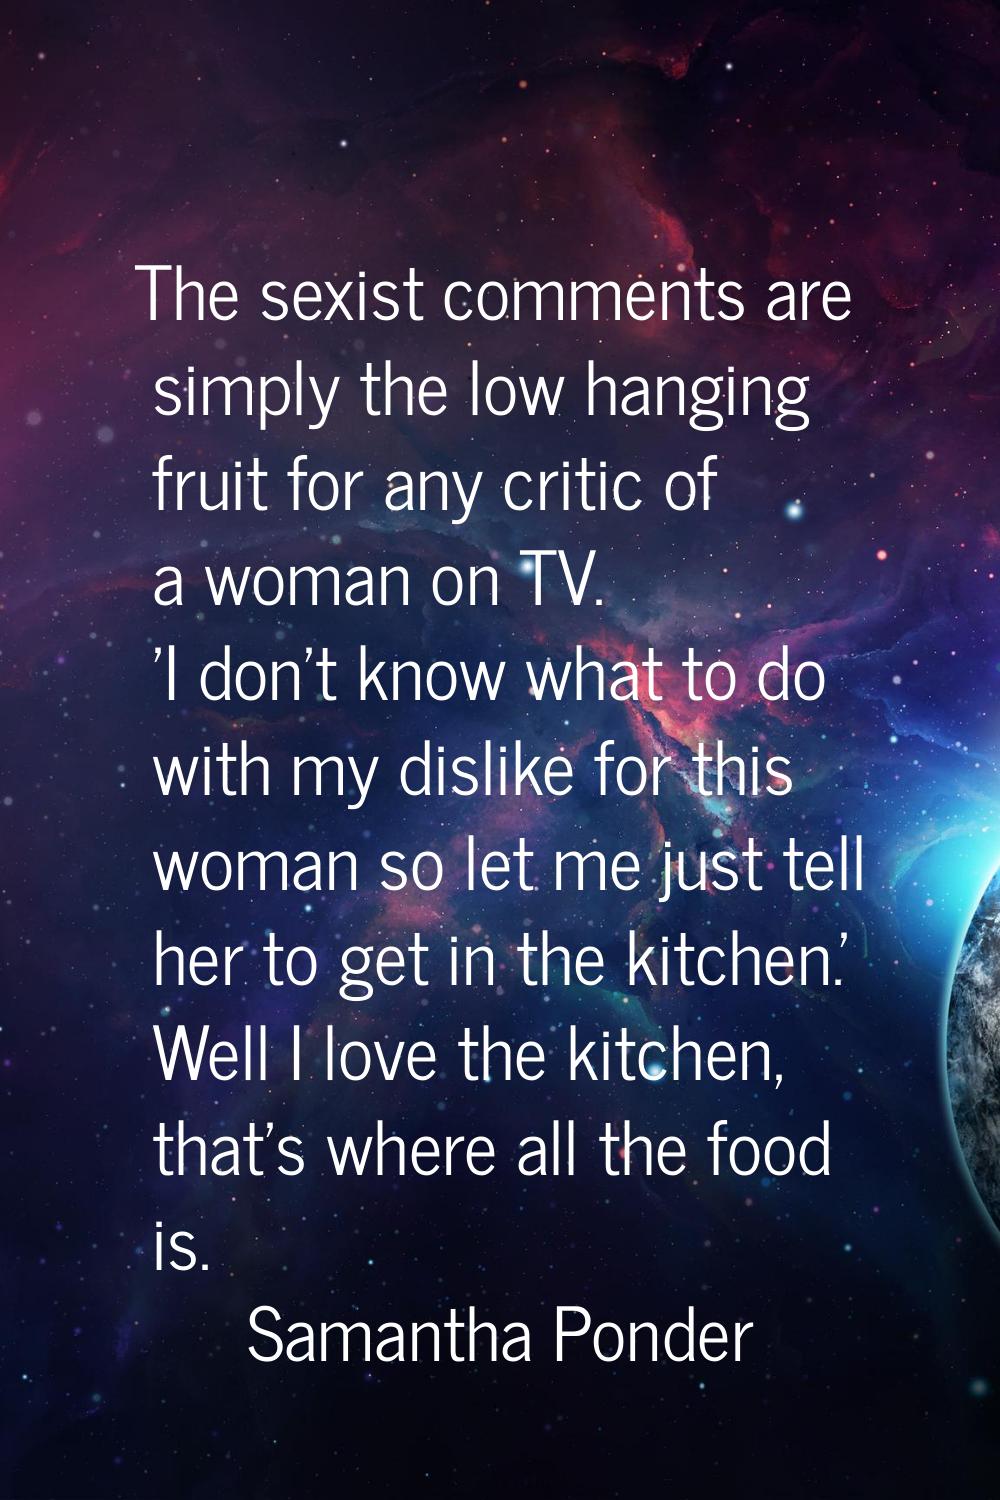 The sexist comments are simply the low hanging fruit for any critic of a woman on TV. 'I don't know